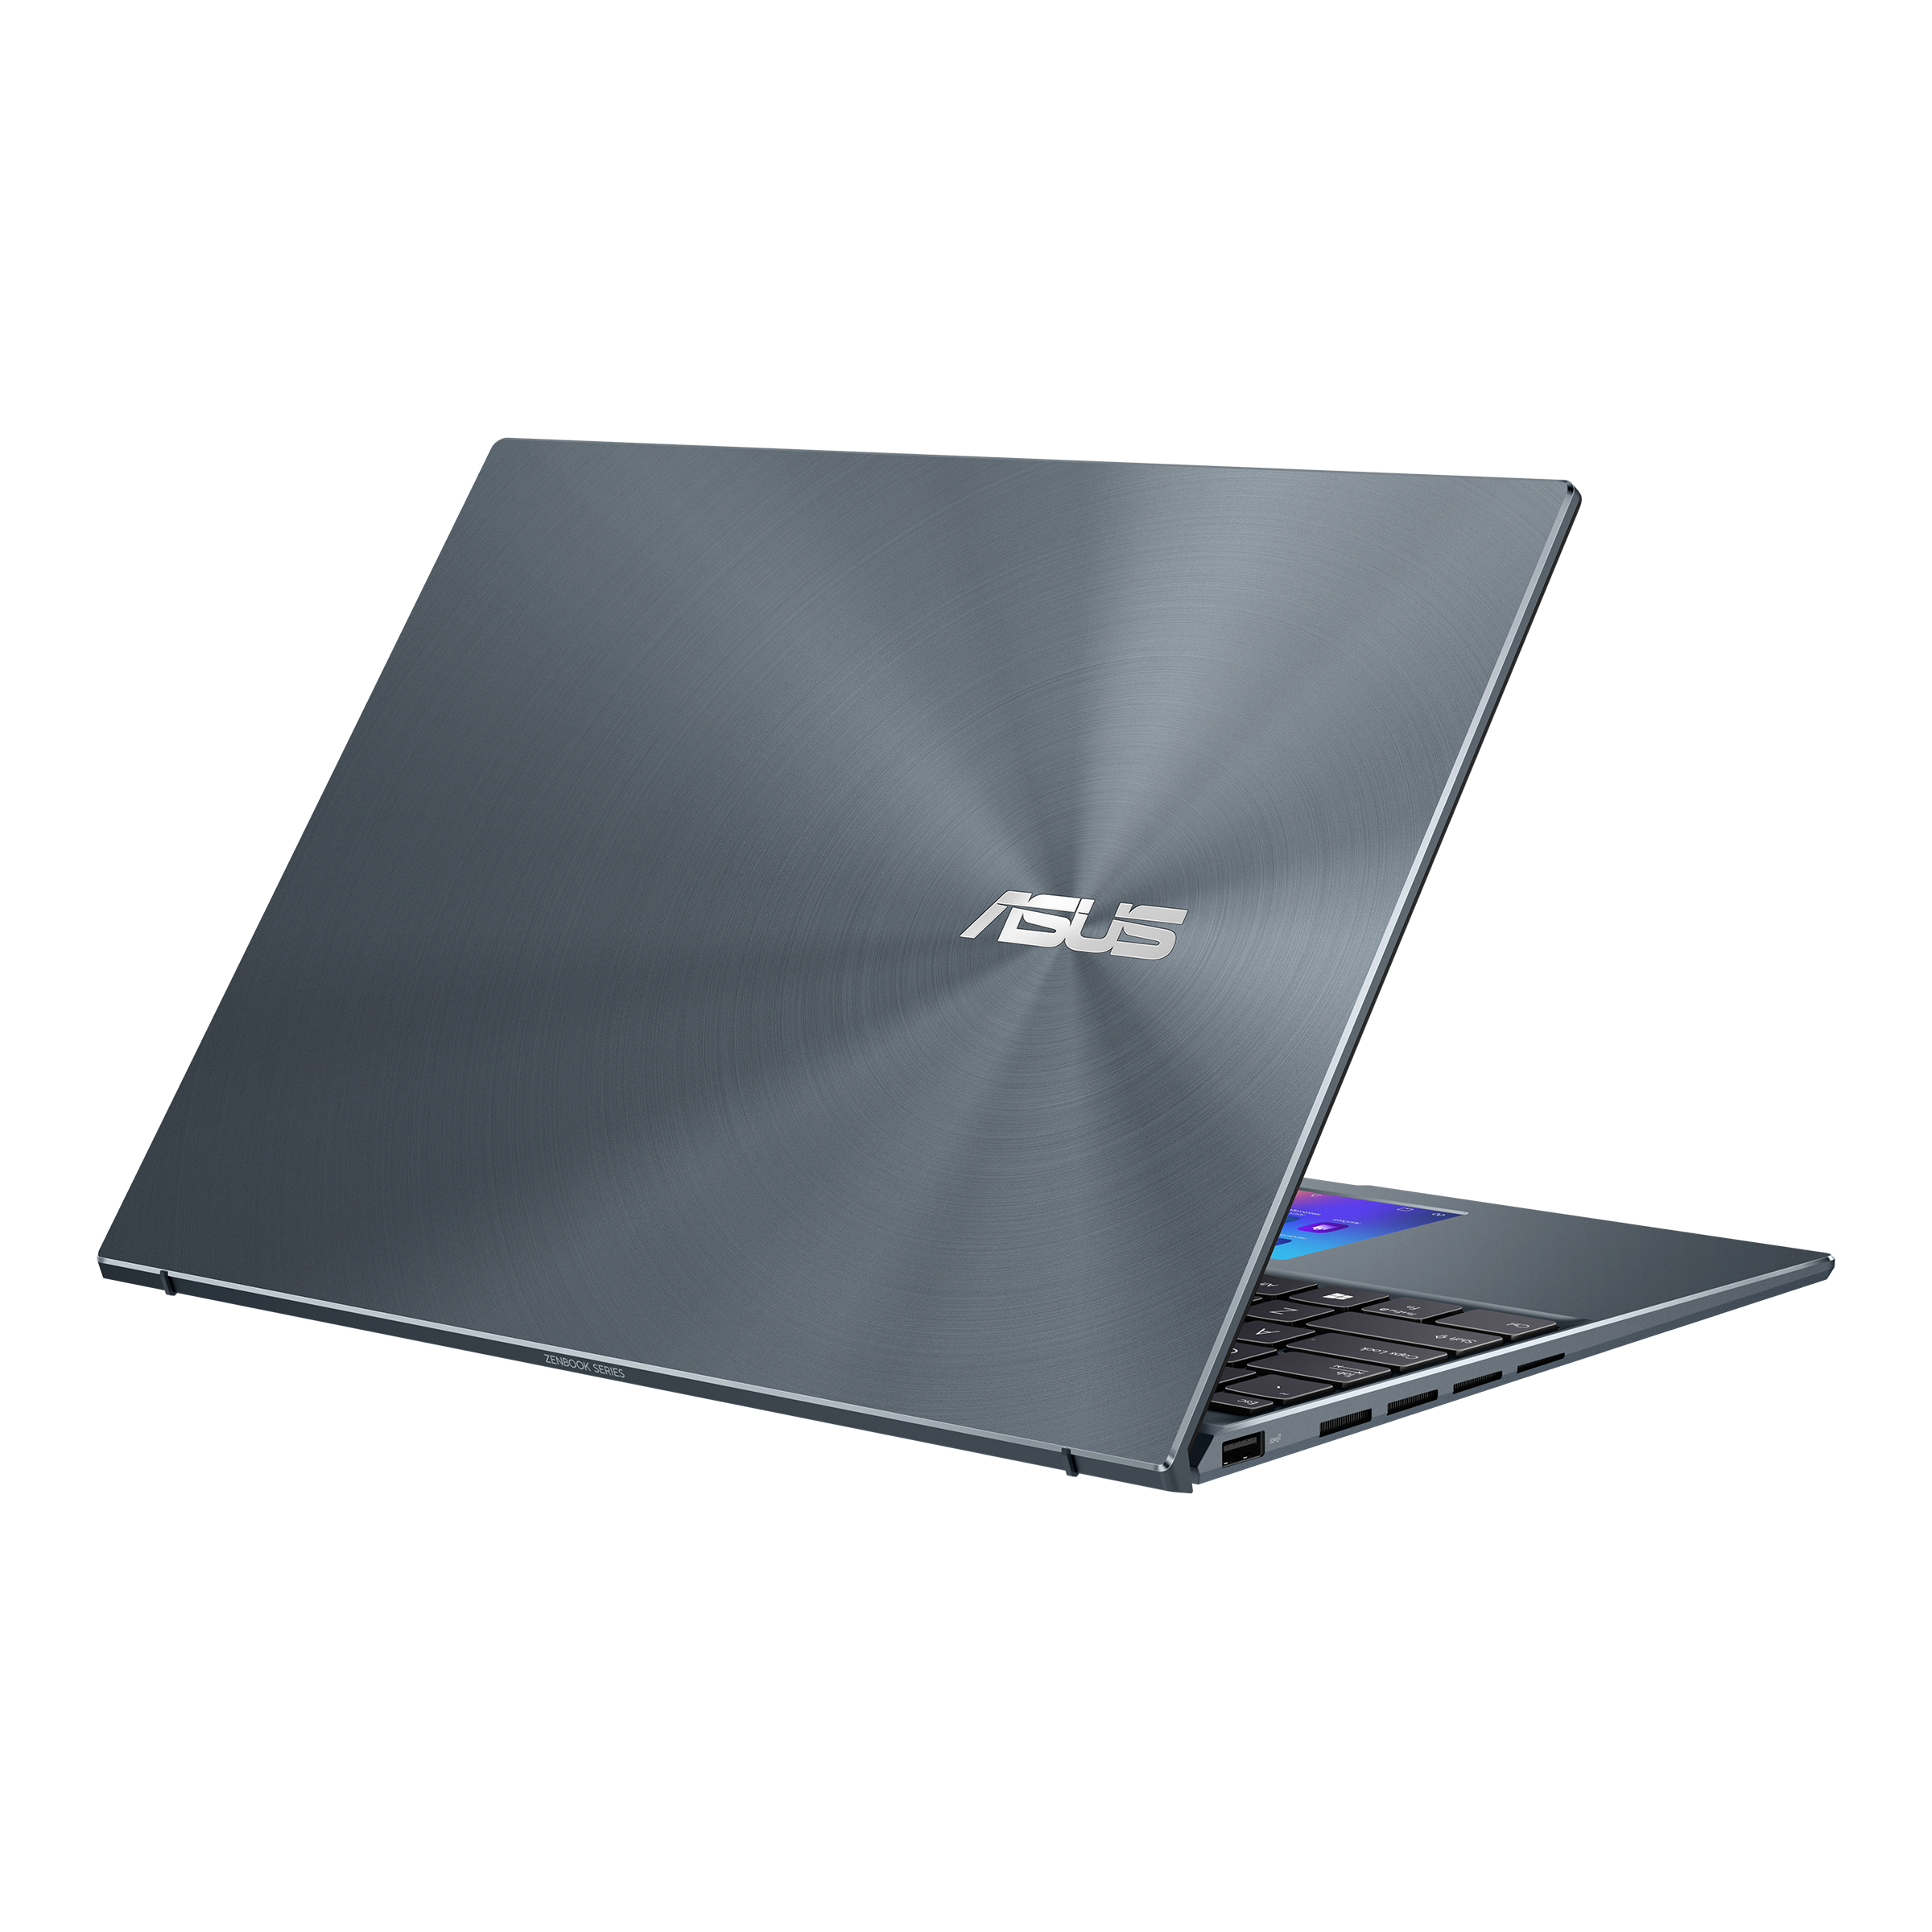 14X OLED 11th Intel)｜Laptops For Home｜ASUS Global